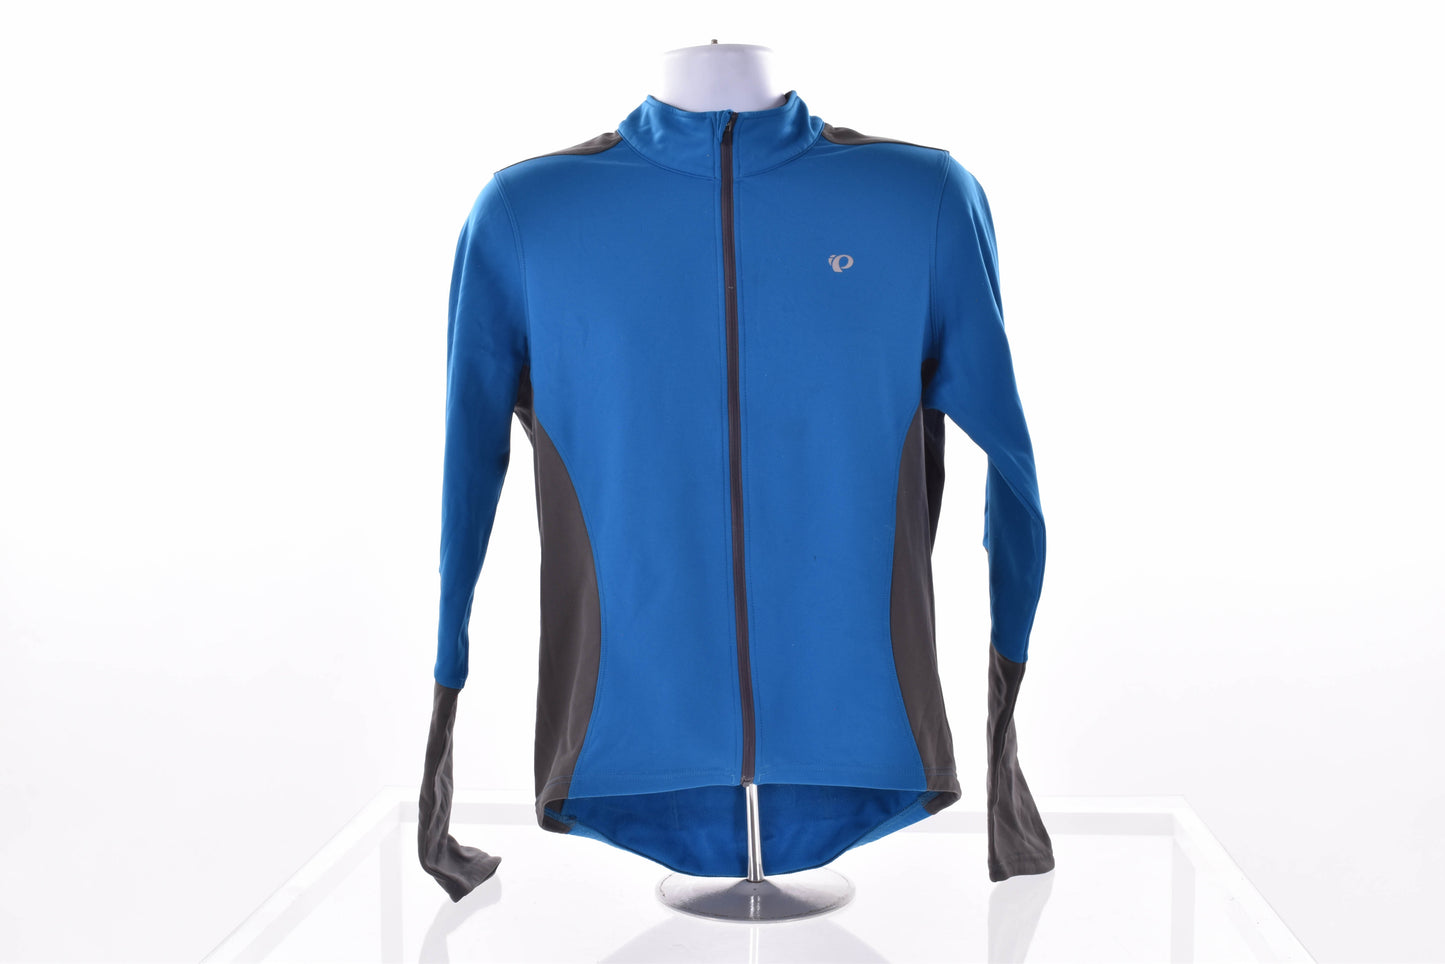 USED Pearl Izumi Large Jersey and Jacket Value Pack Set All Weather